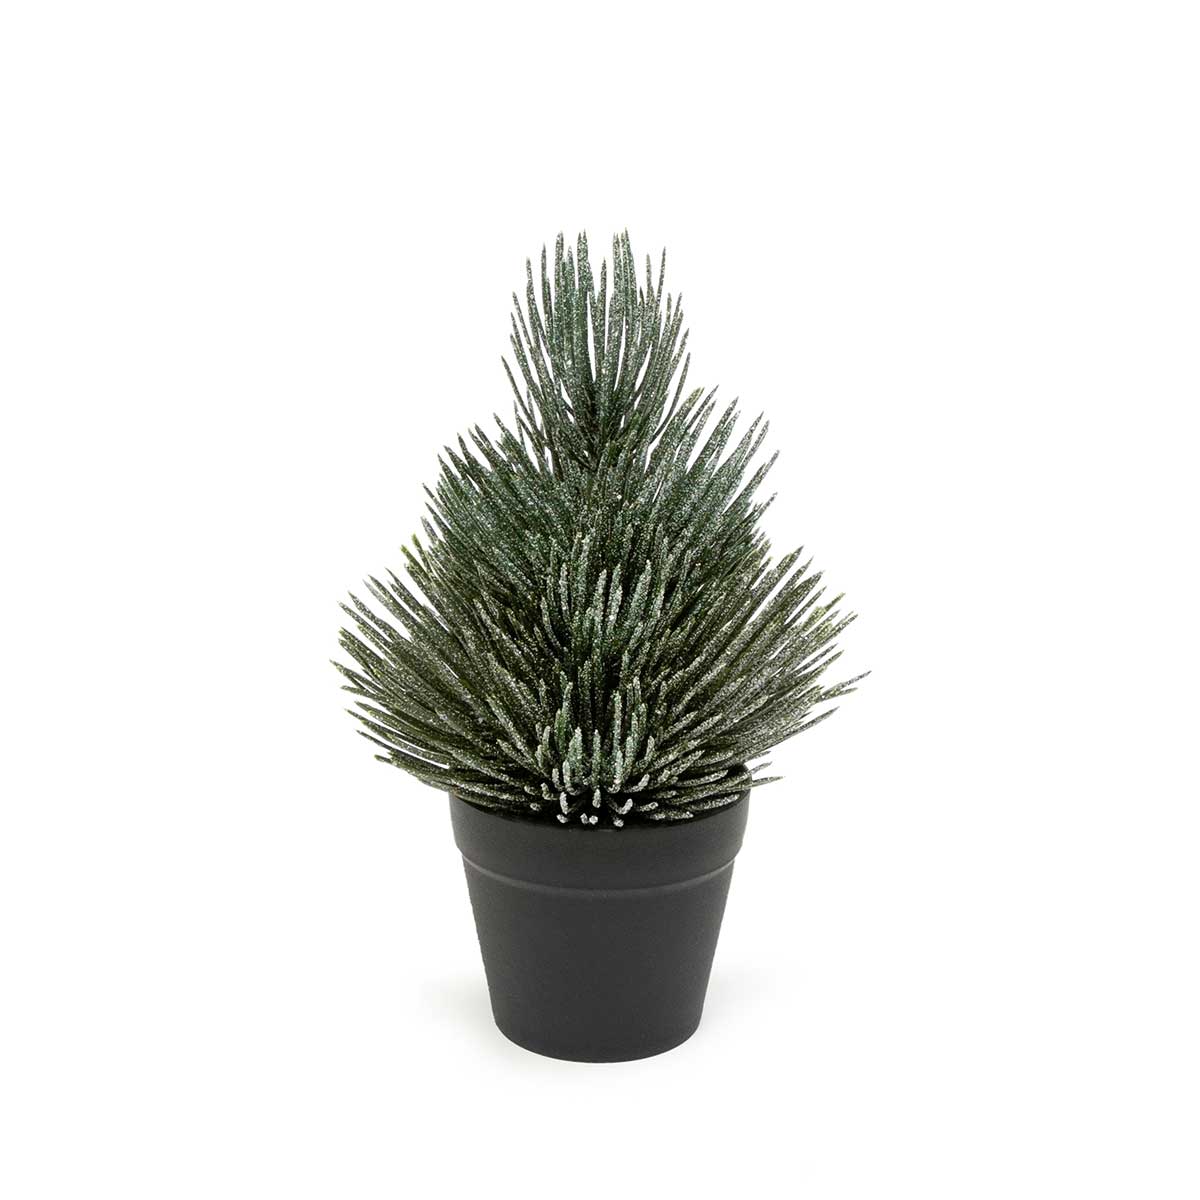 TREE PINE FROSTED SMALL 5IN X 8IN IN BLACK POT PLASTIC